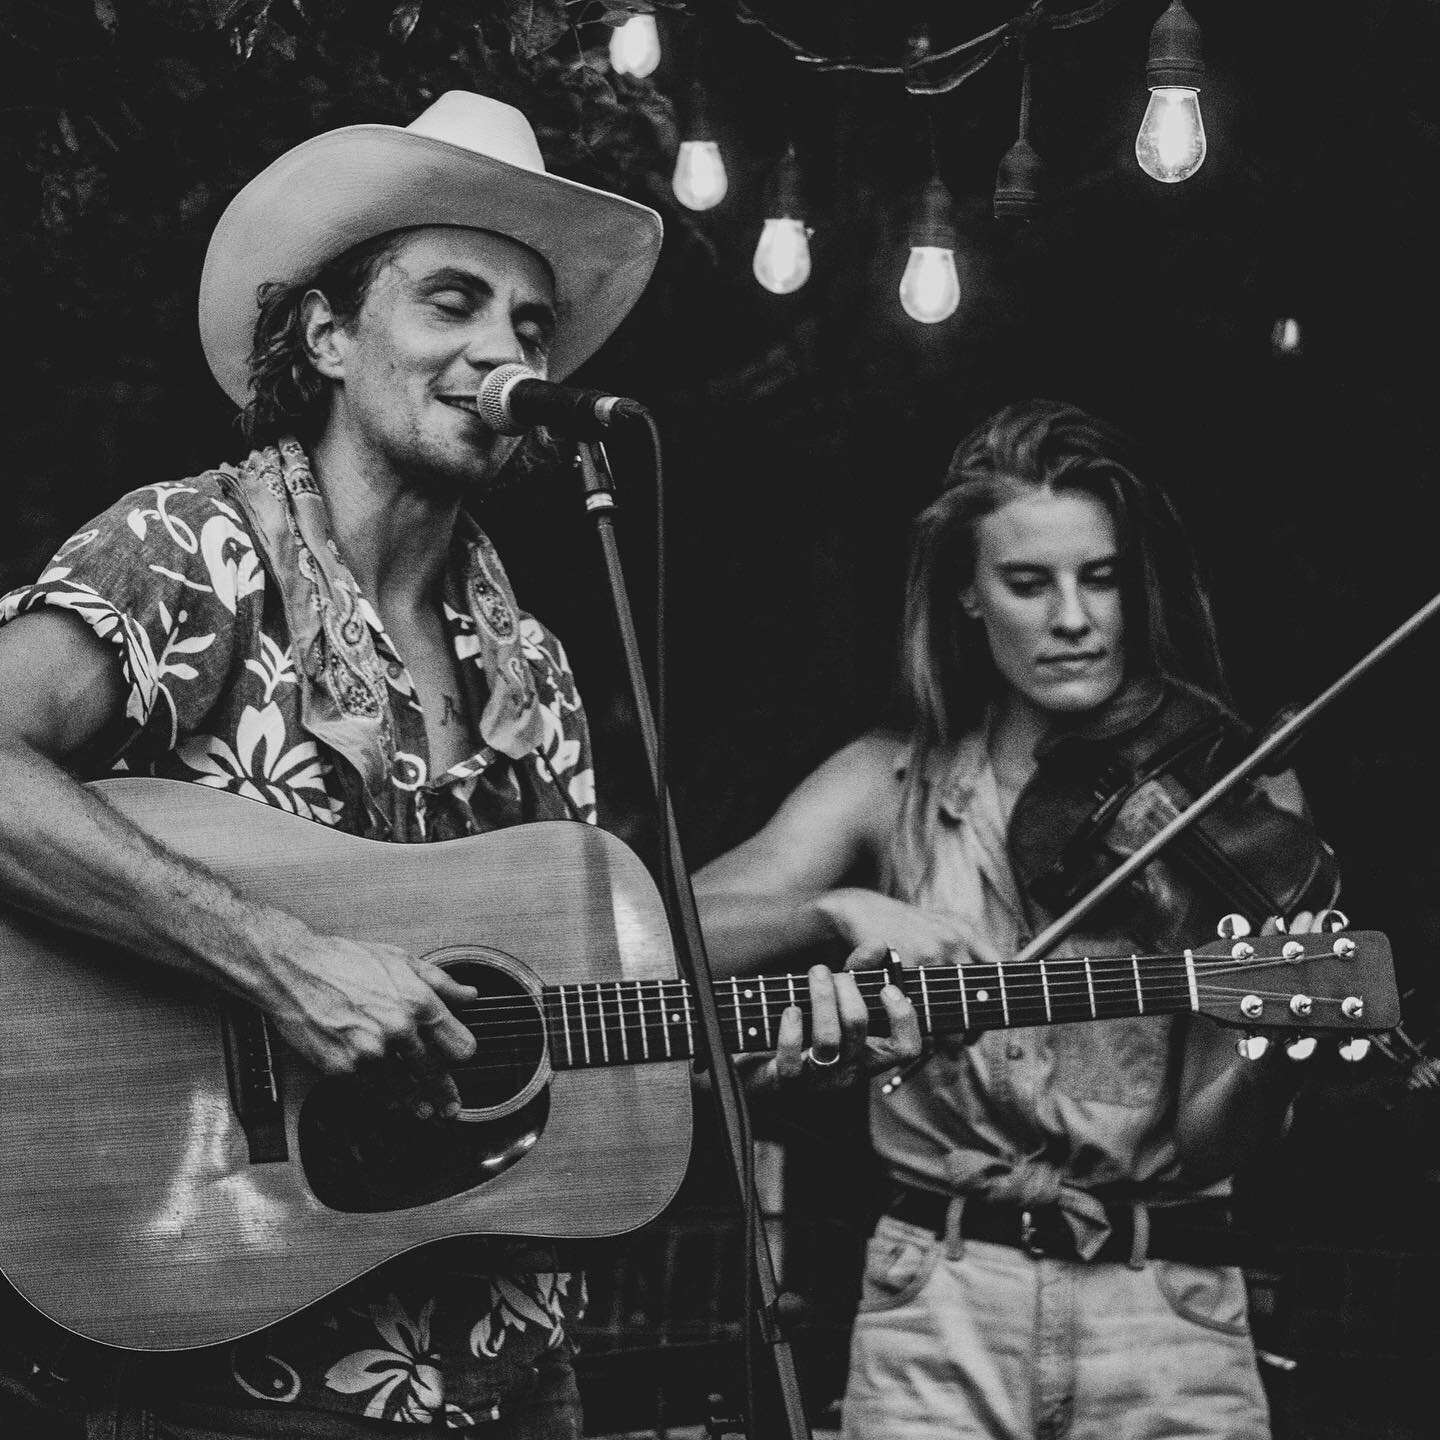 Tonight, Open Space Brewing is proud to present Forrest and Margaret McCurren, a  giddy-up night showcasing two talented musicians on a journey through New Mexico and beyond. While we don&rsquo;t call ourselves a music venue, we do certainly enjoy a 